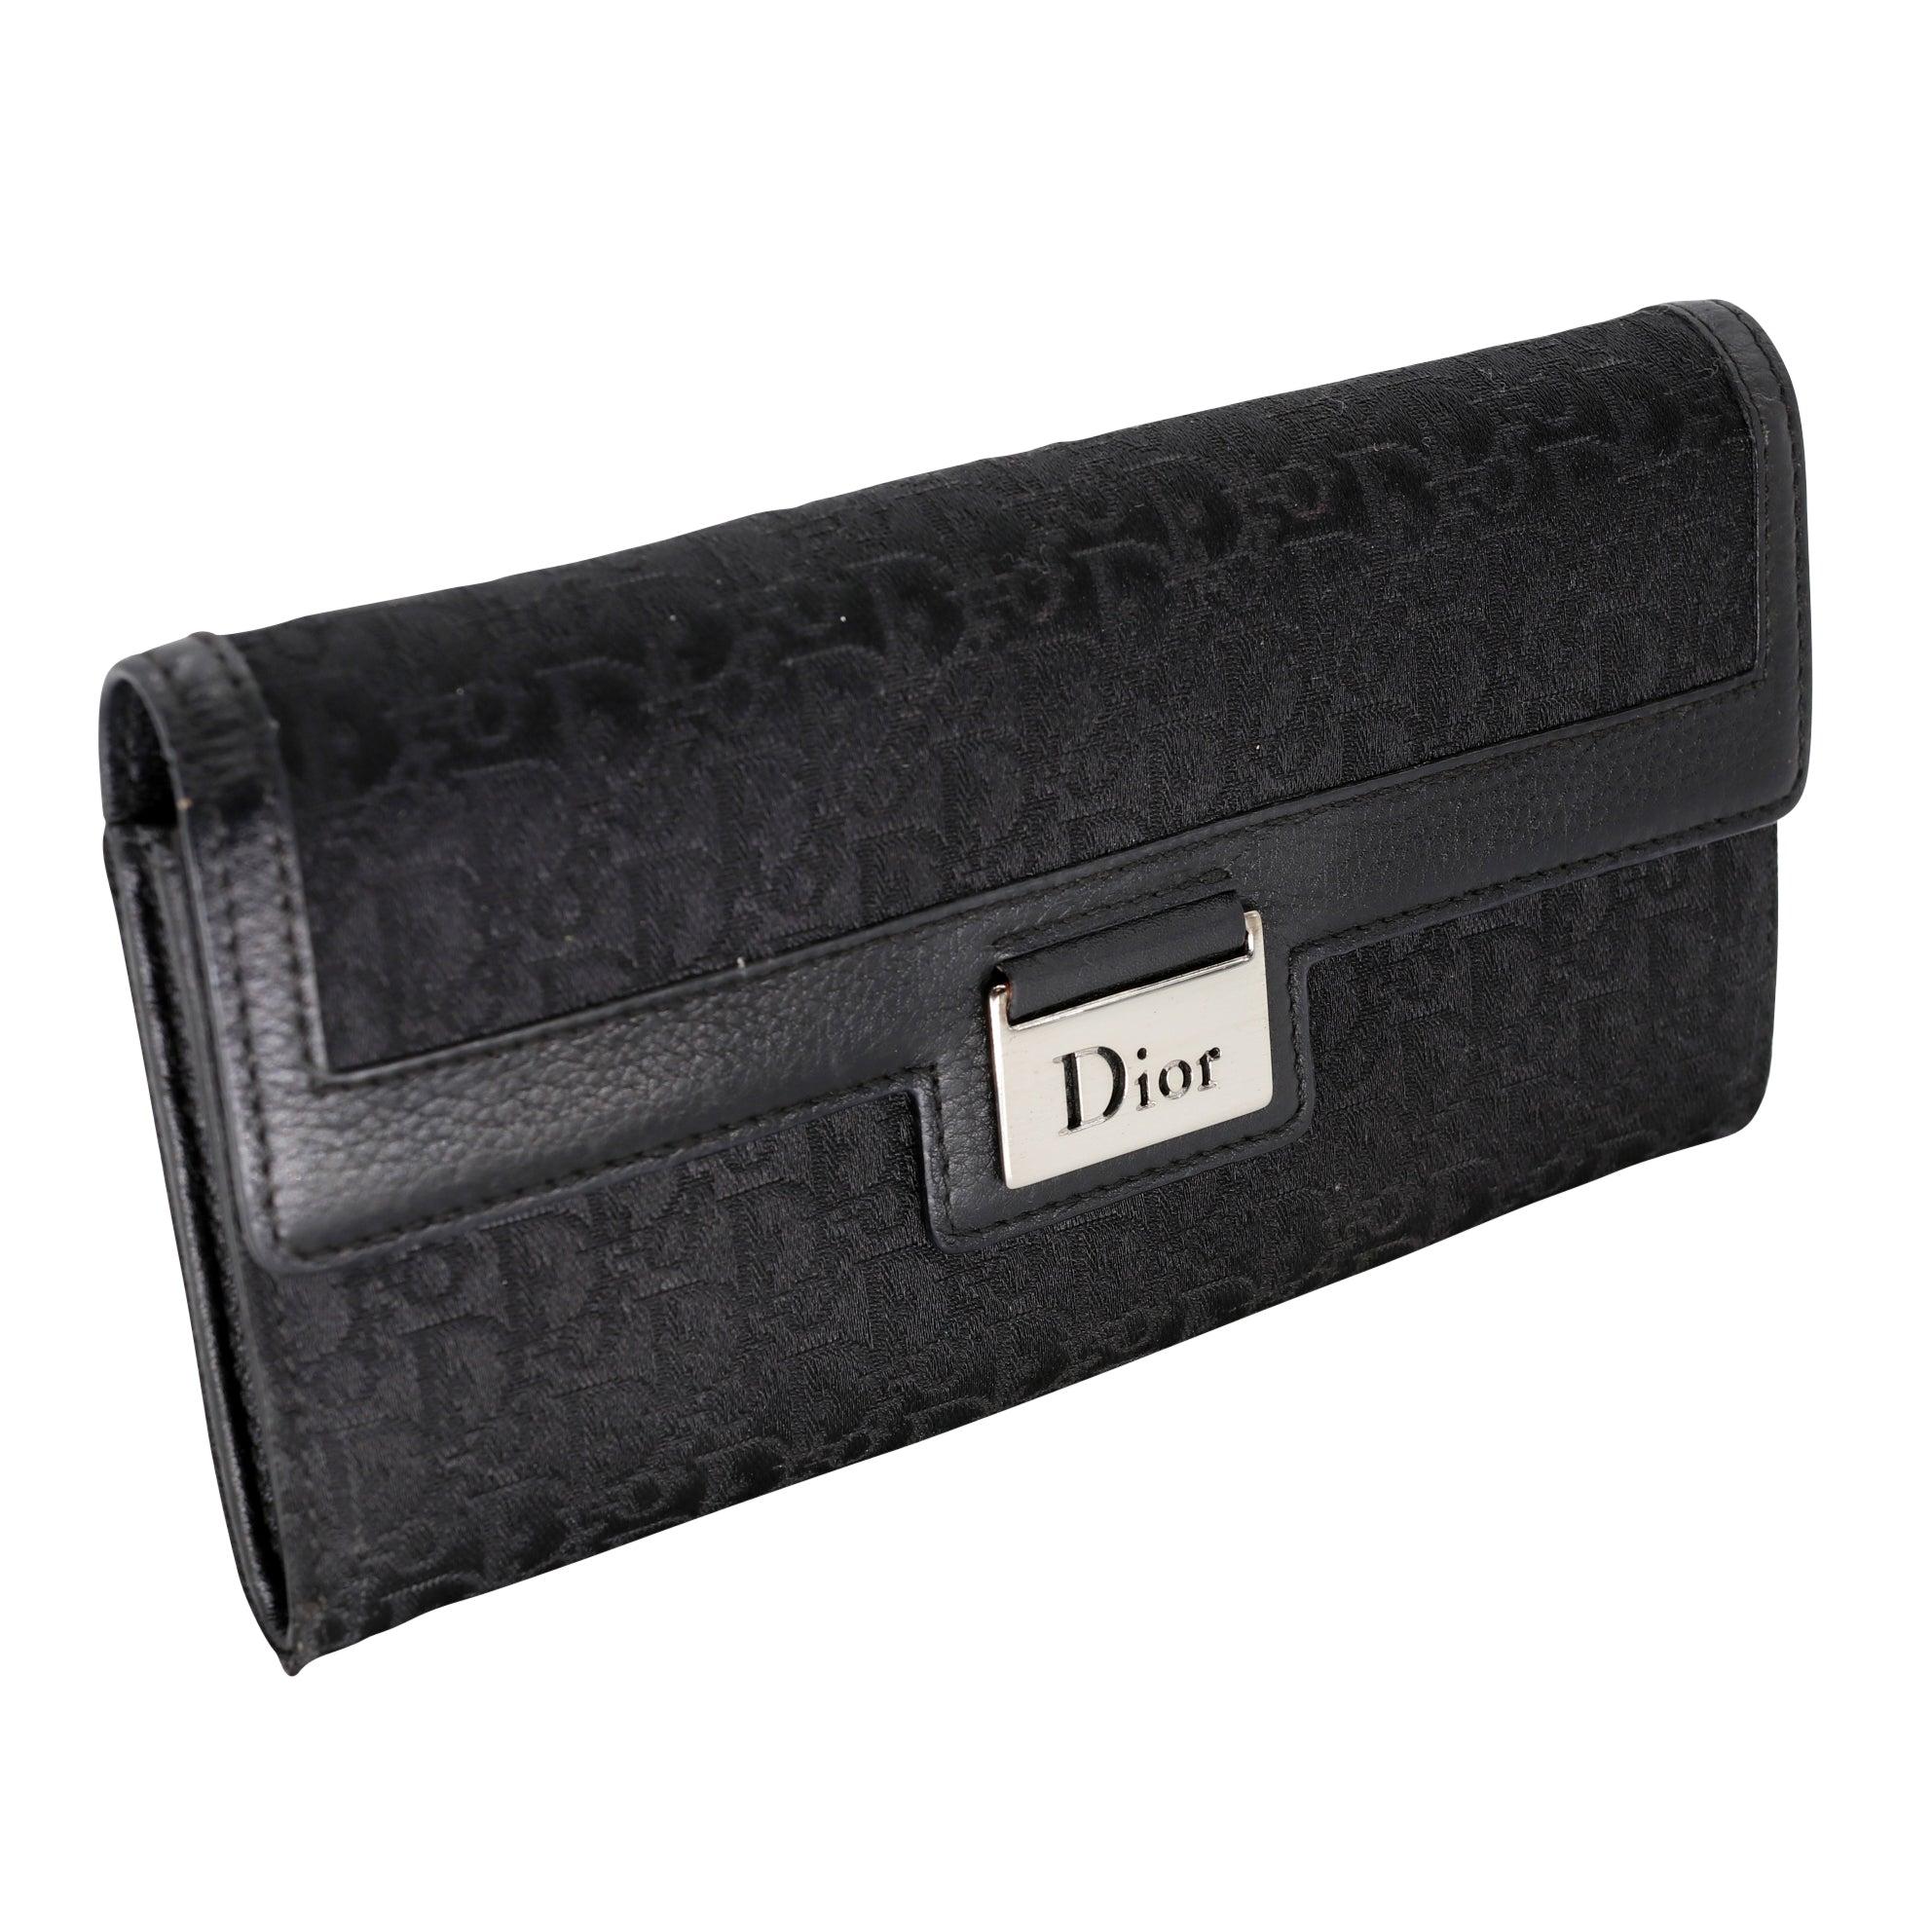 Here is another timeless piece by the famous DIOR house the signature monogram that made them famous on black Noir canvas. Wallet includes long wallet compact and practical alternative to the traditional wallet. It is crafted in Black Dior Oblique